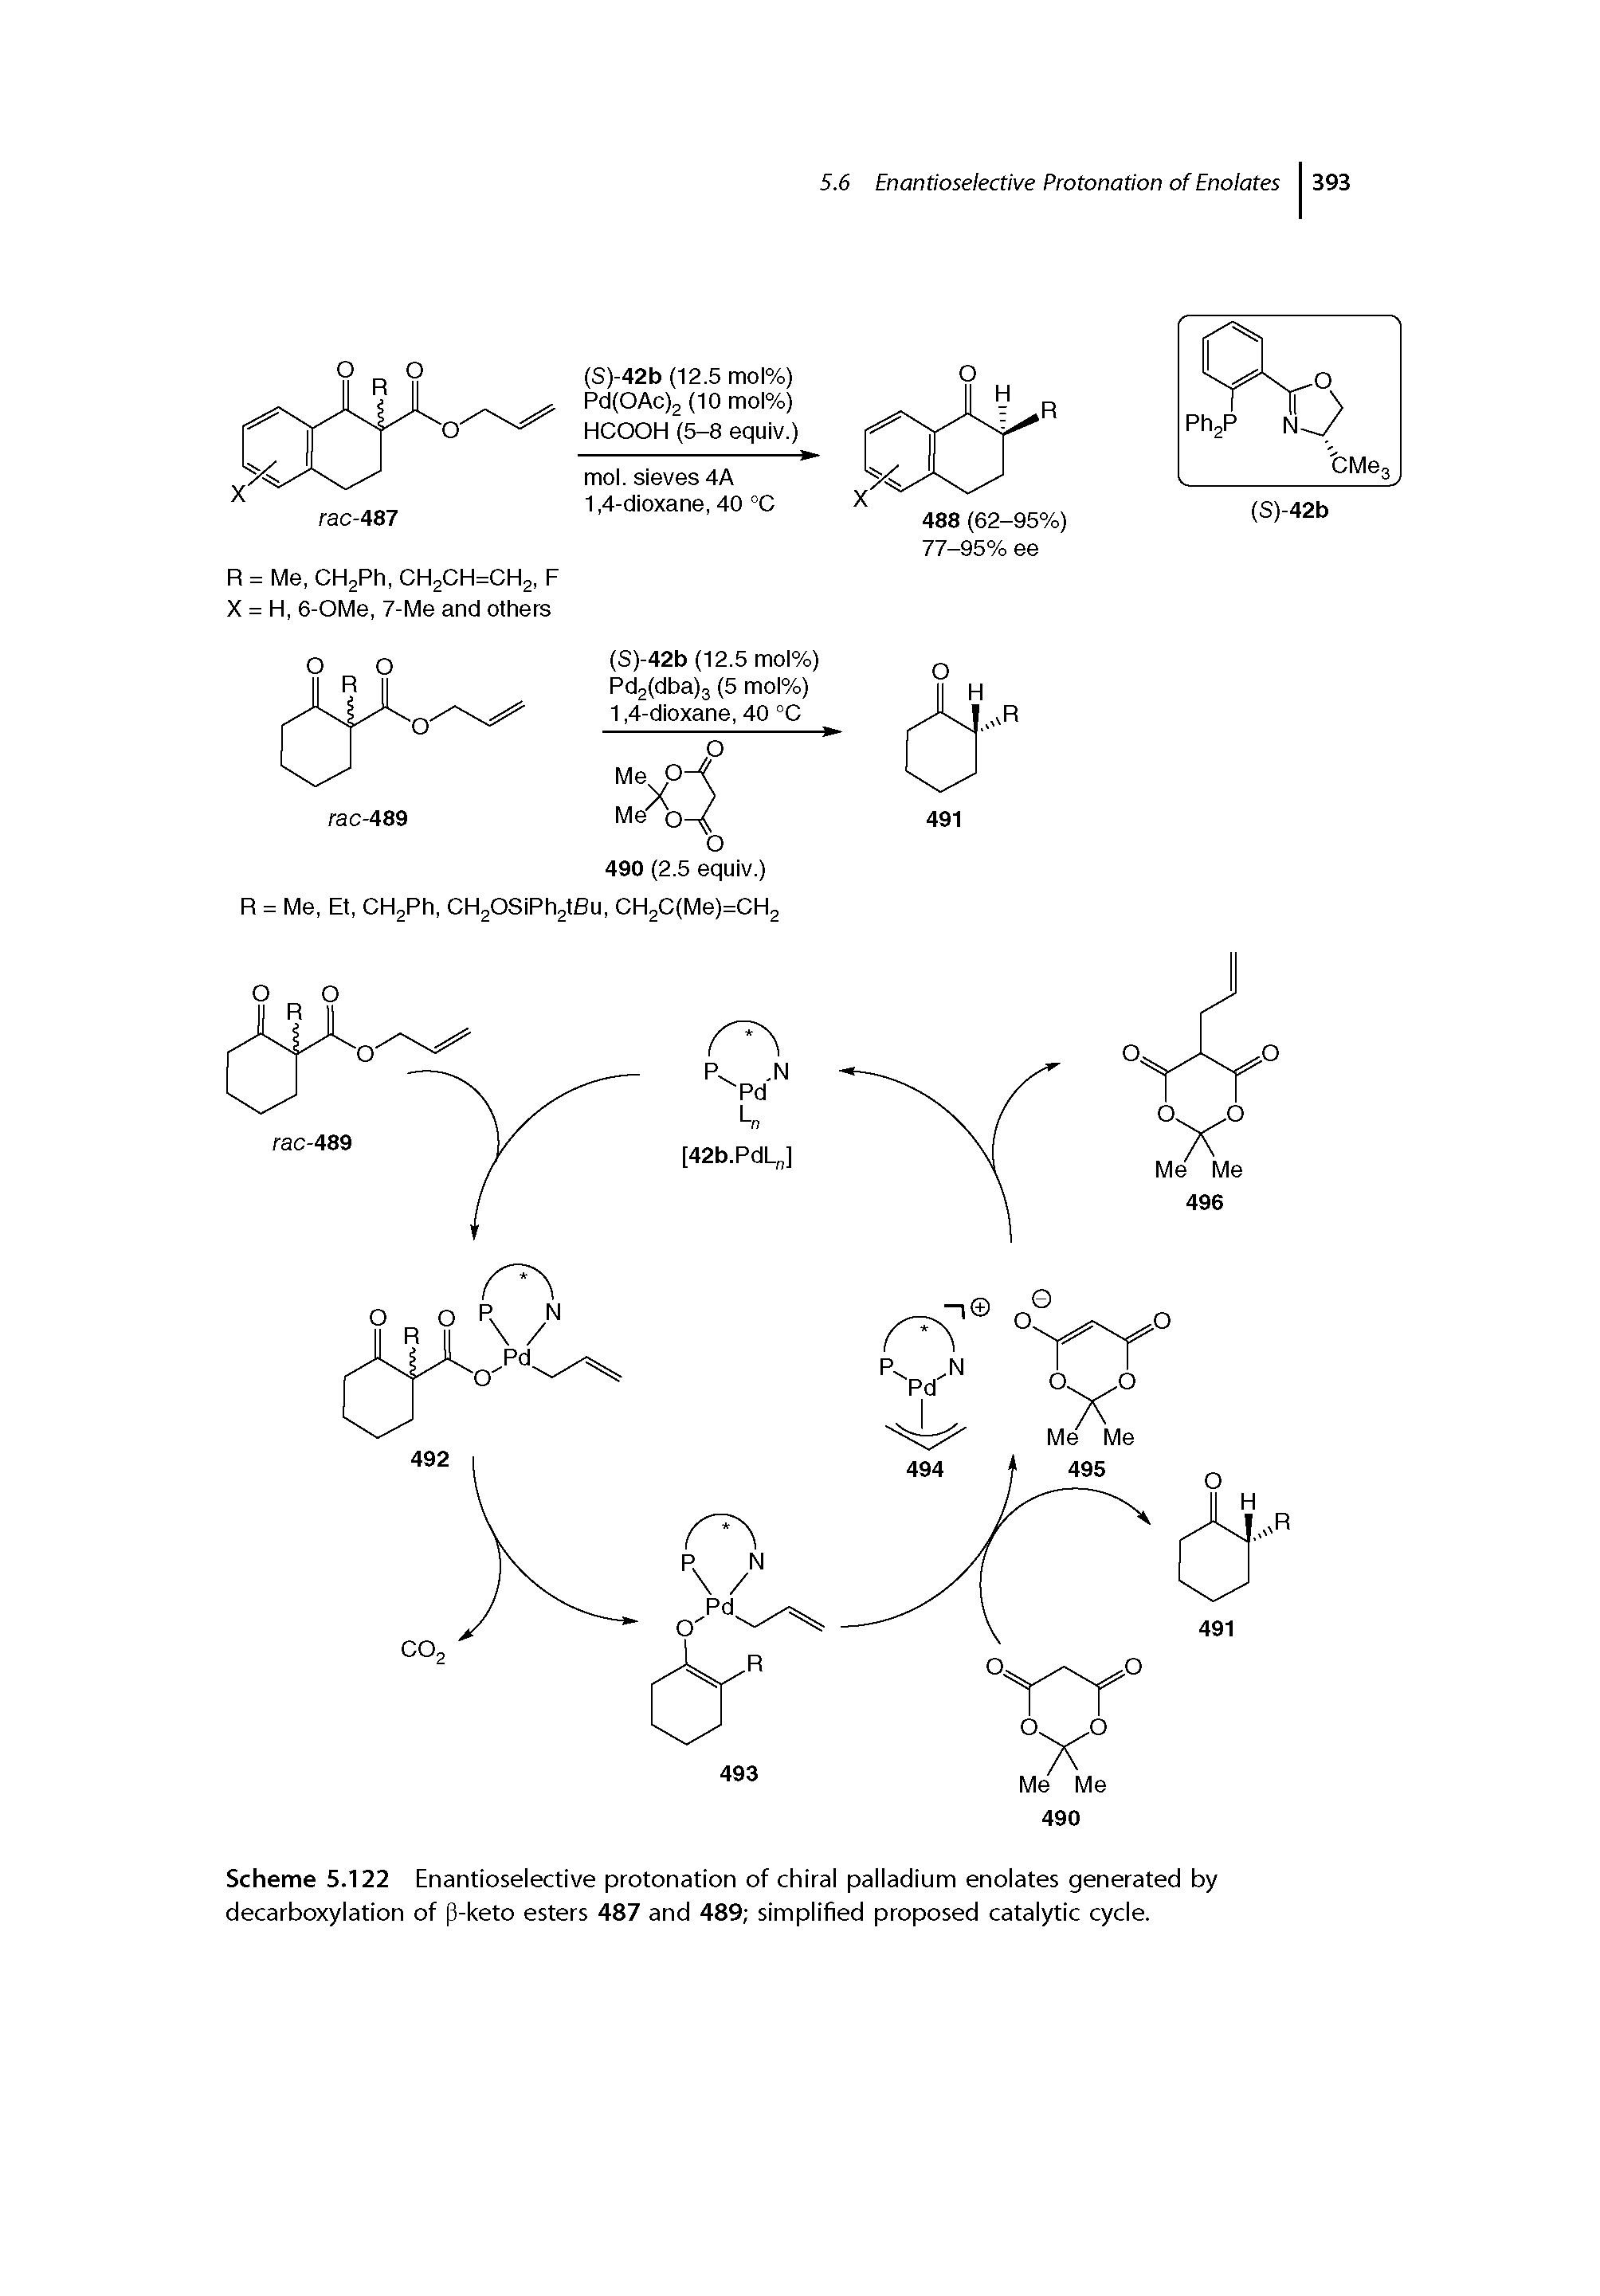 Scheme 5.122 Enantioselective protonation of chiral palladium enolates generated by decarboxylation of p-keto esters 487 and 489 simplified proposed catalytic cycle.